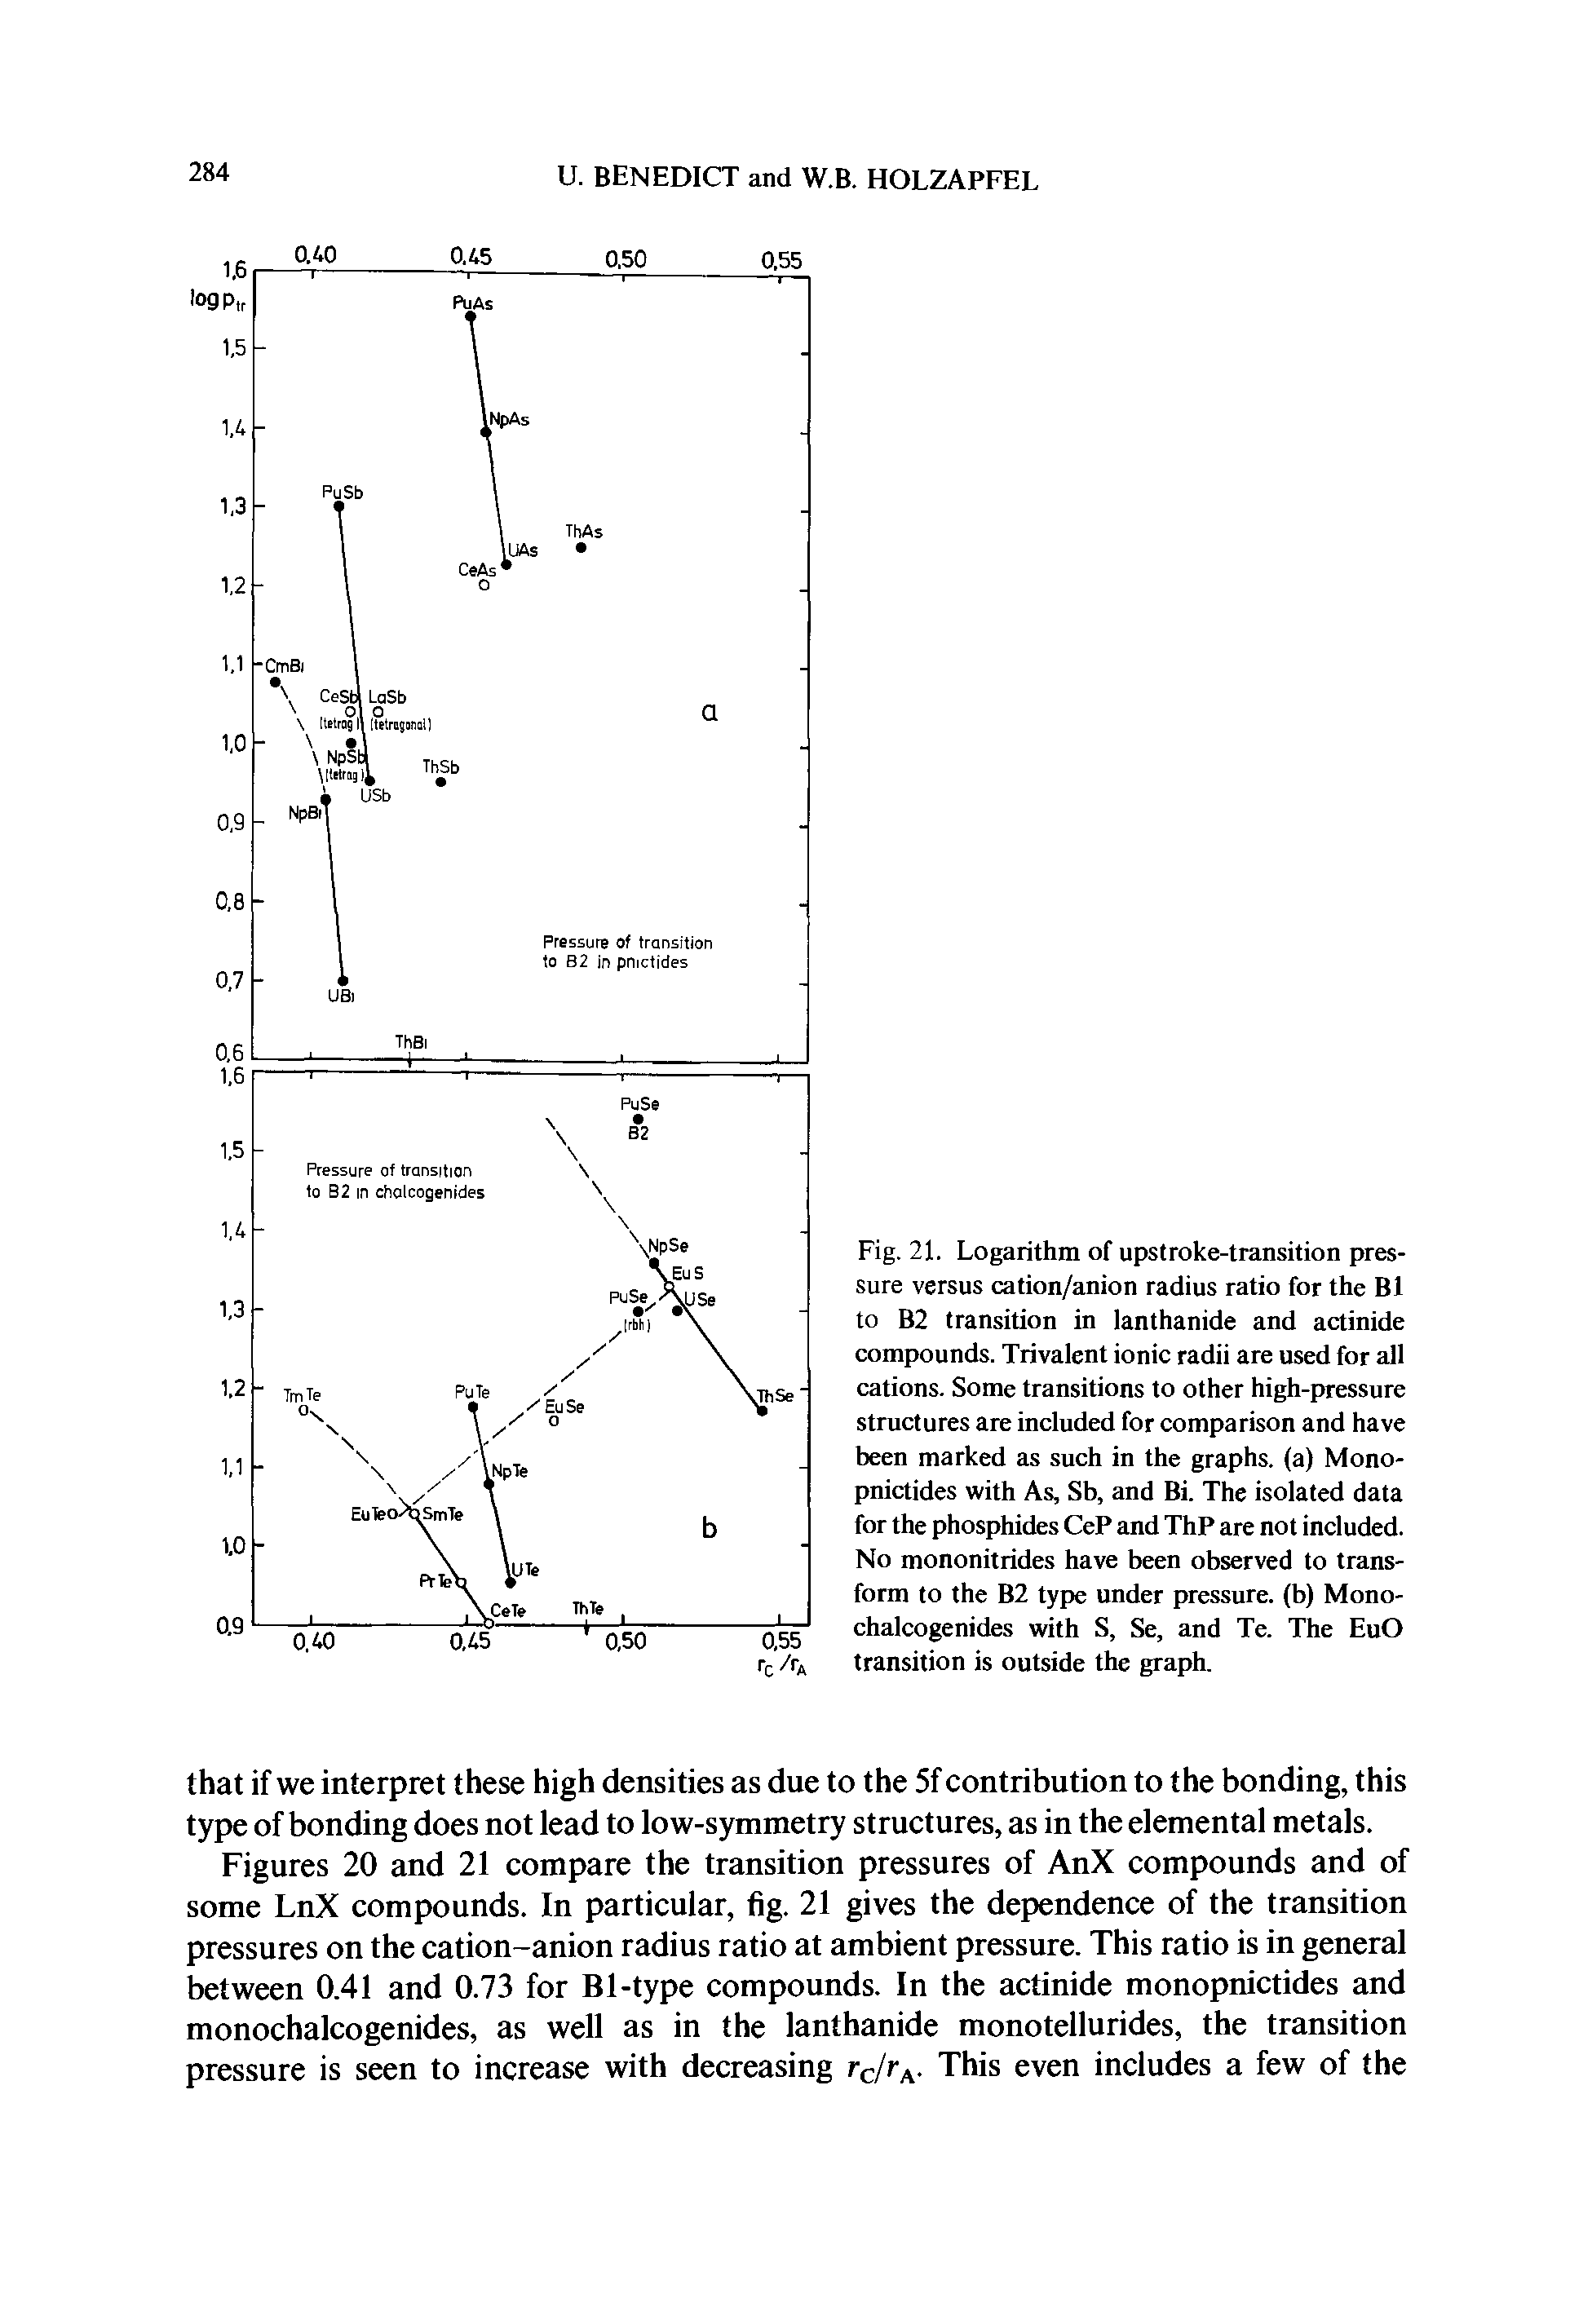 Fig. 21. Logarithm of upstroke-transition pressure versus cation/anion radius ratio for the B1 to B2 transition in lanthanide and actinide compounds. Trivalent ionic radii are used for all cations. Some transitions to other high-pressure structures are included for comparison and have been marked as such in the graphs, (a) Mono-pnictides with As, Sb, and Bi. The isolated data for the phosphides CeP and ThP are not included. No mononitrides have been observed to transform to the B2 type under pressure, (b) Mono-chalcogenides with S, Se, and Te. The EuO transition is outside the graph.